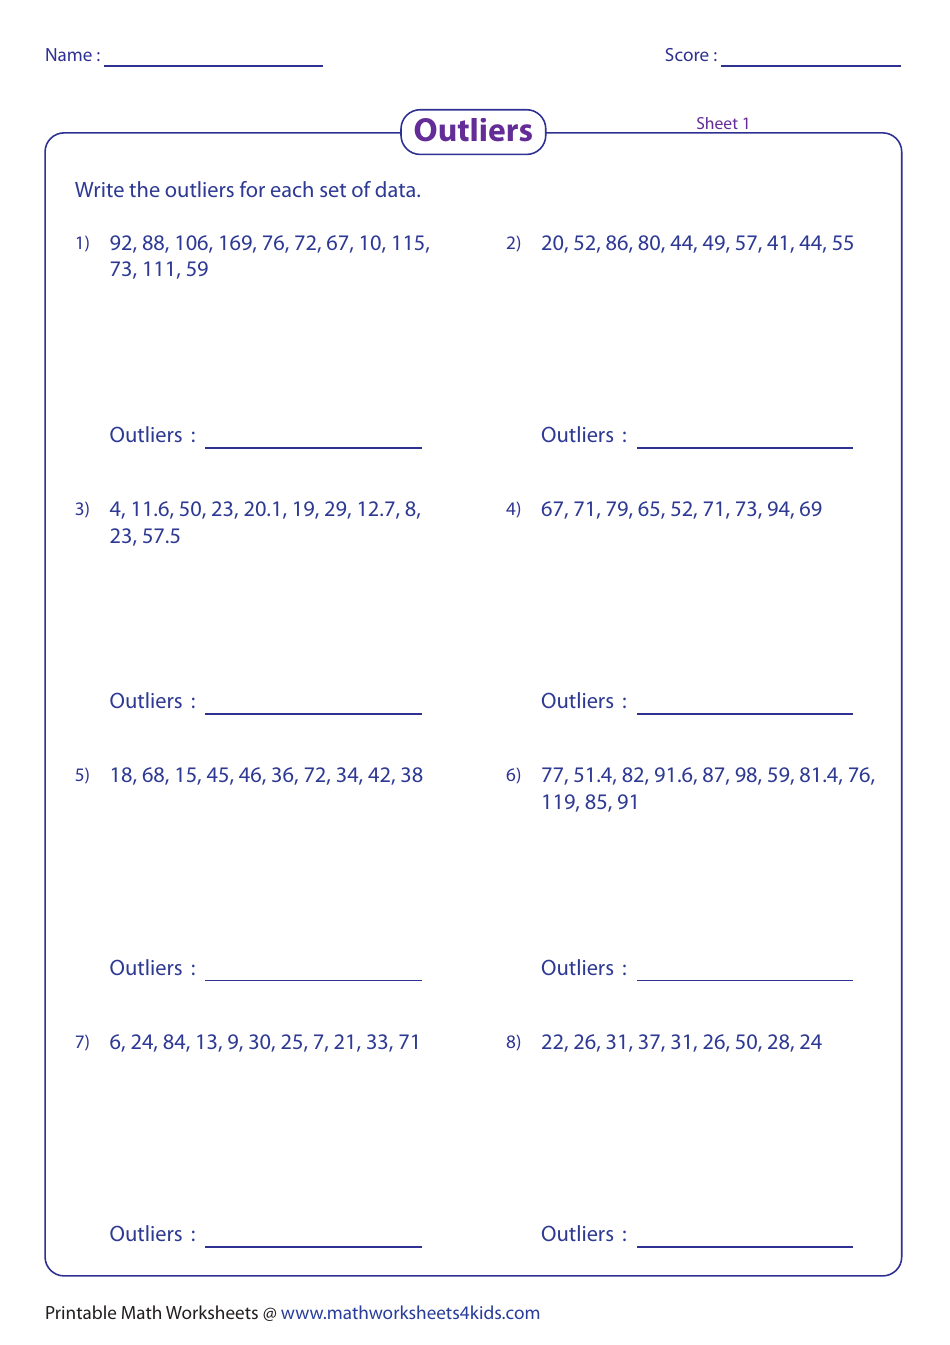 Outliers Worksheet With Answer Key Download Printable PDF Templateroller